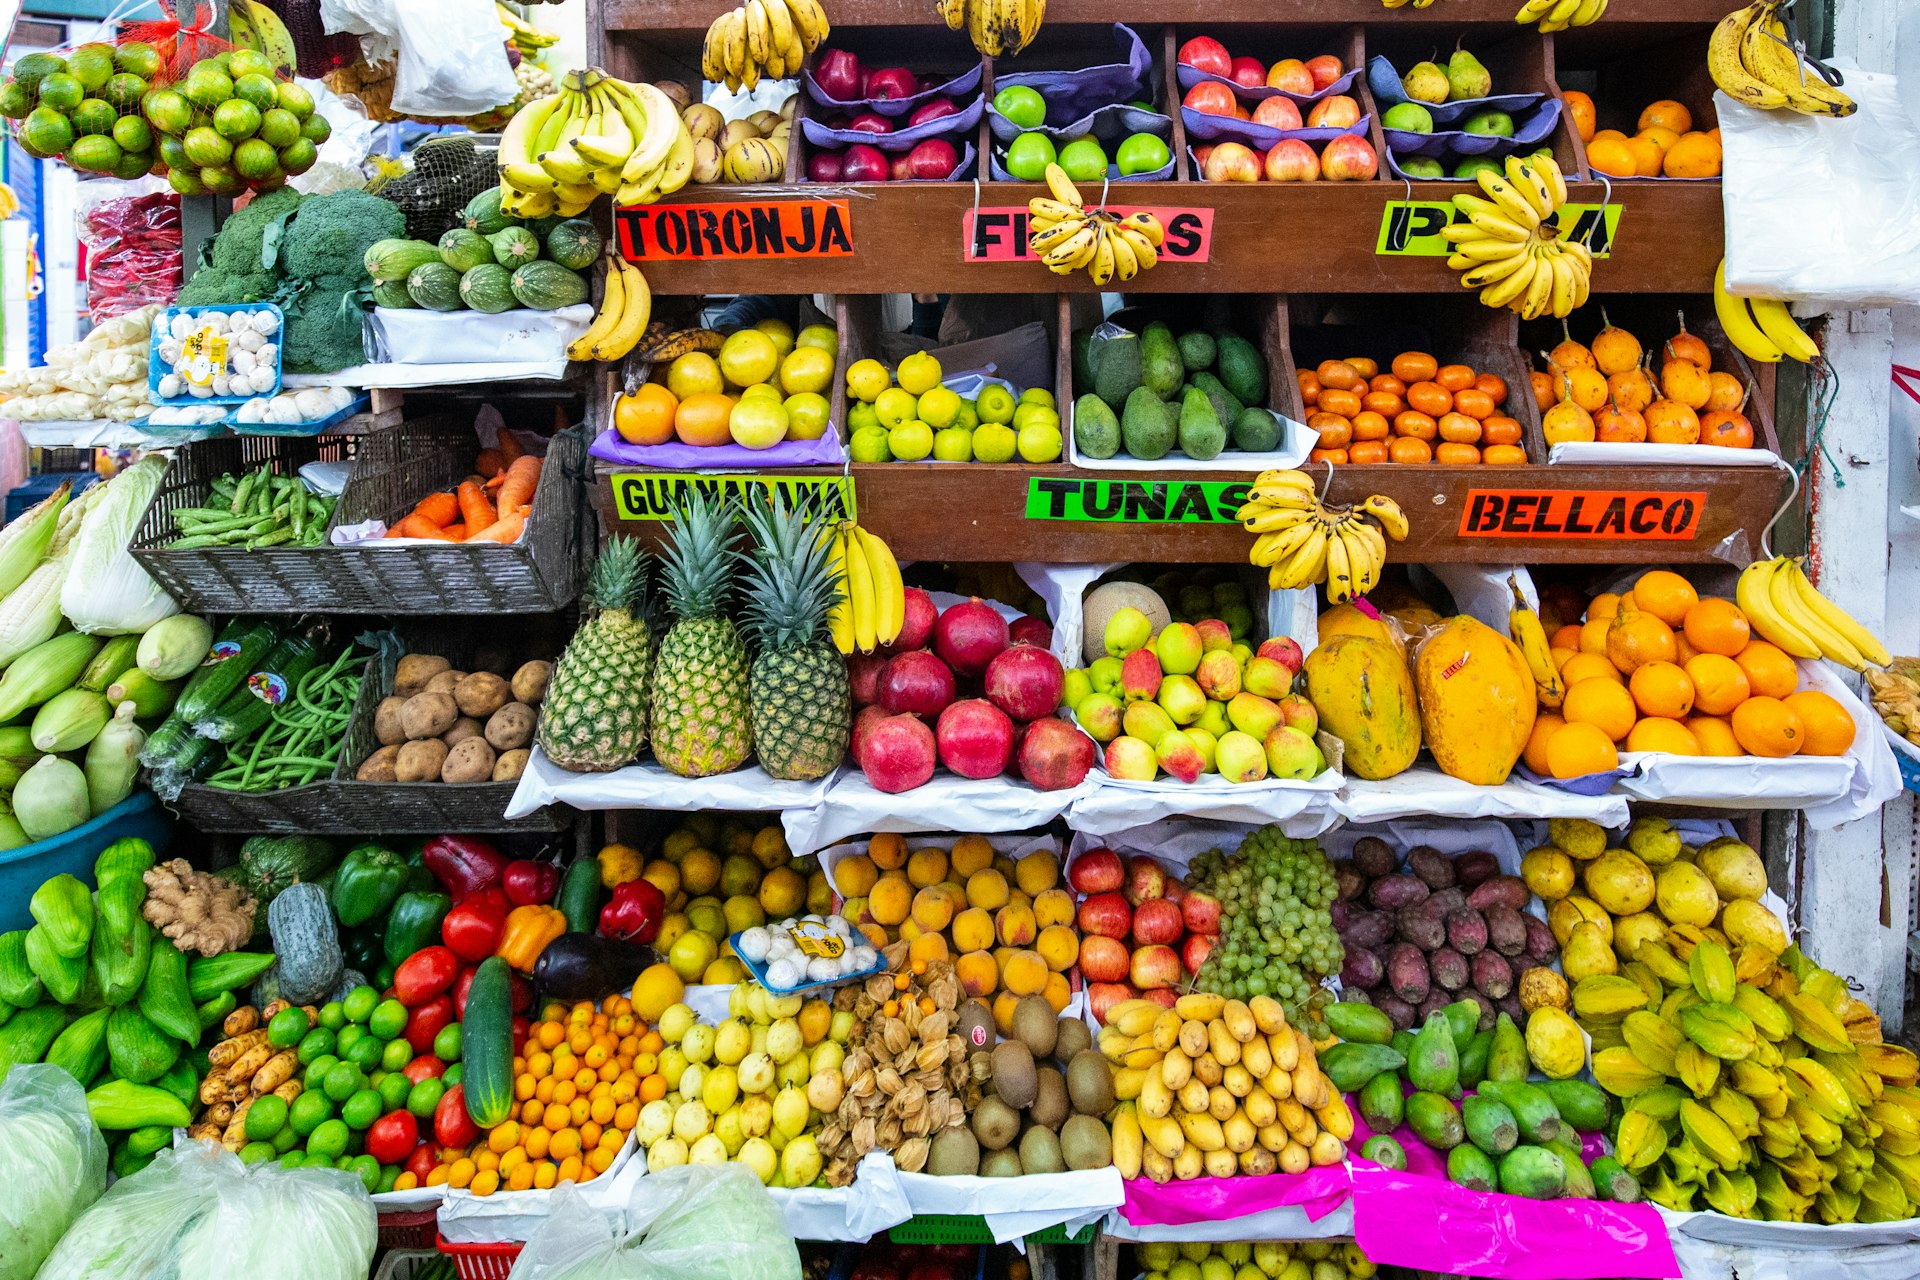 A colorful fruit and vegetable stand in Surquillo Market, Lima, Peru